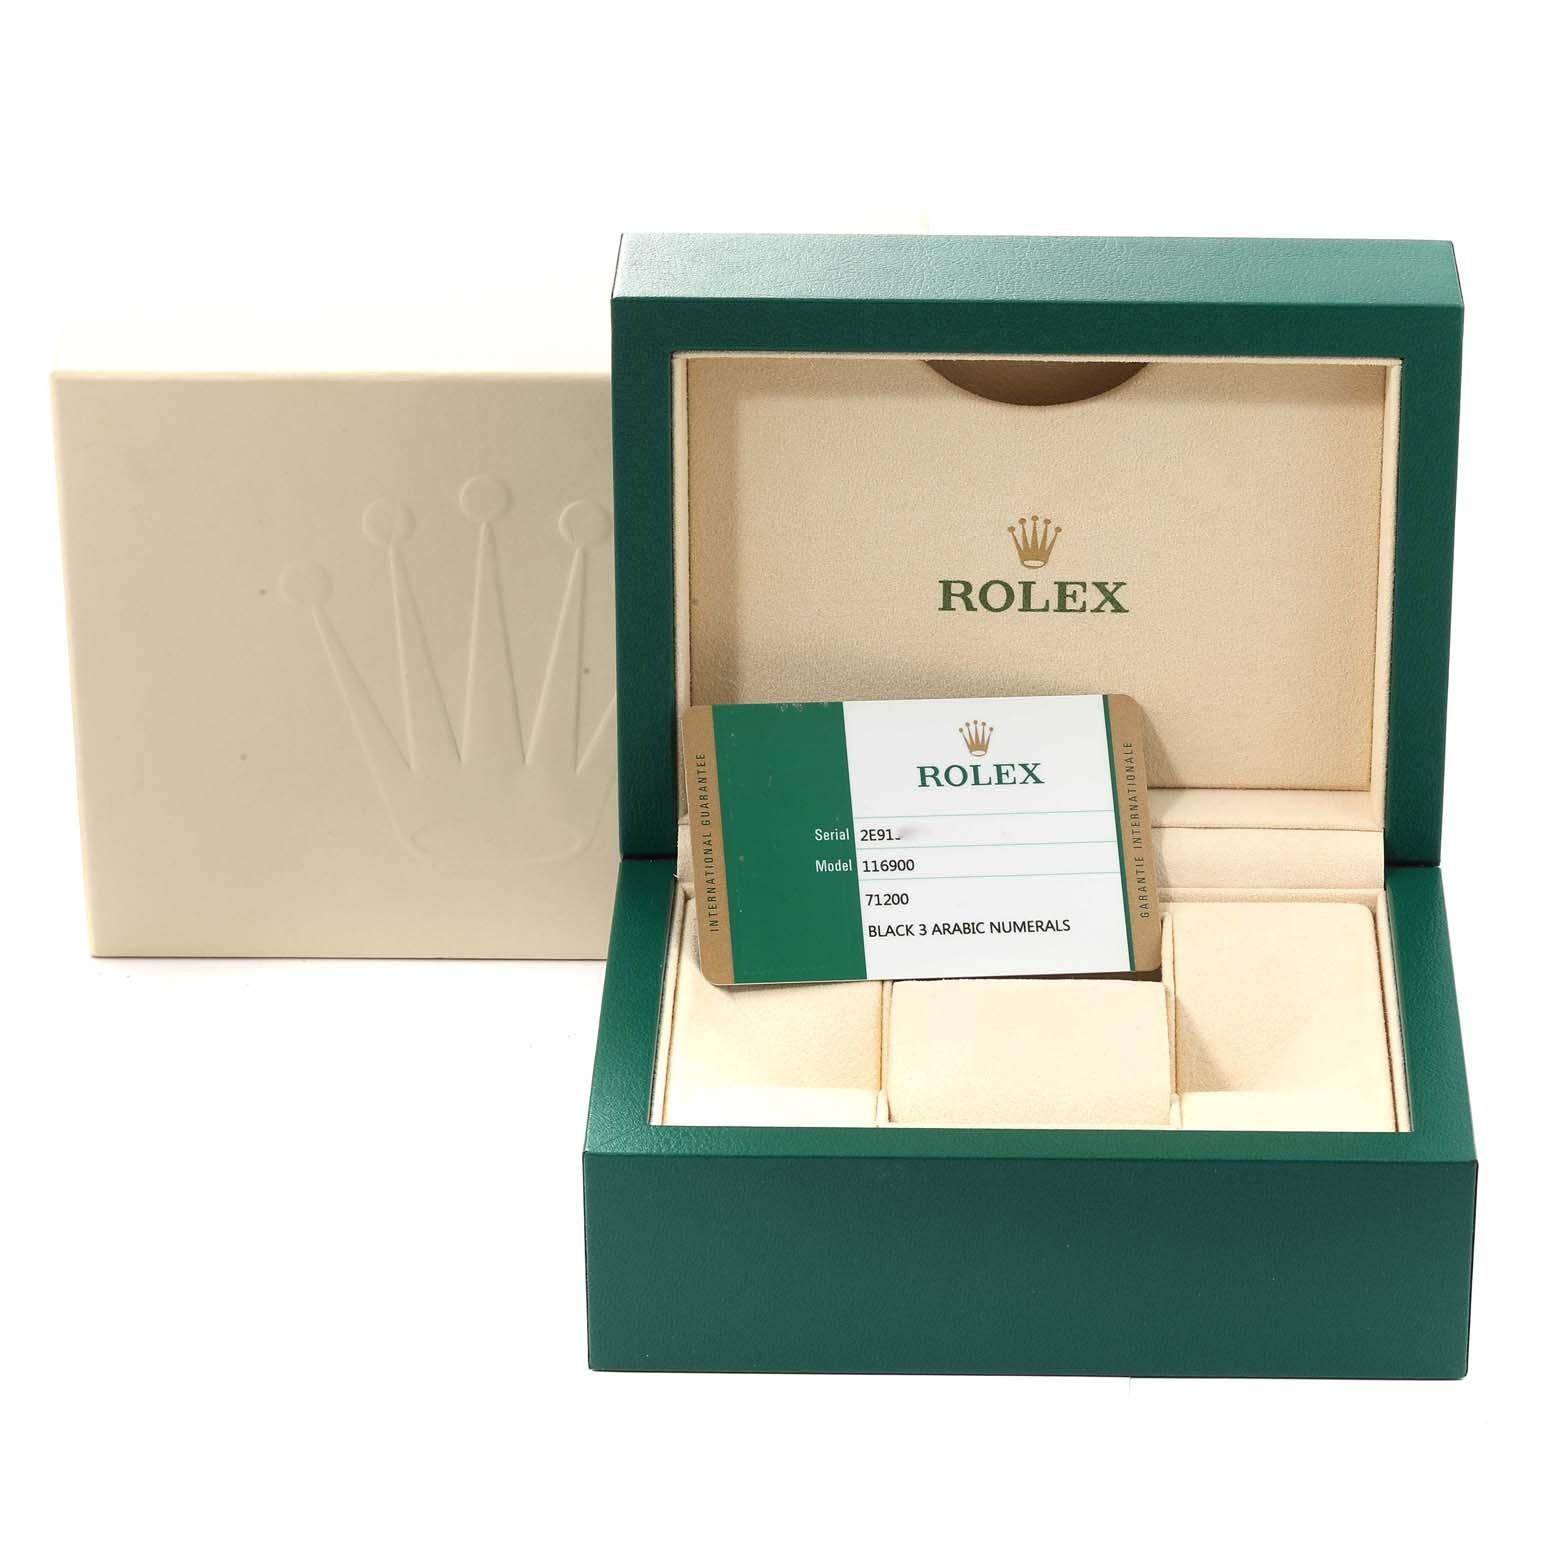 Rolex Oyster Perpetual Air King Green Hand Steel Mens Watch 116900 Box Card 5